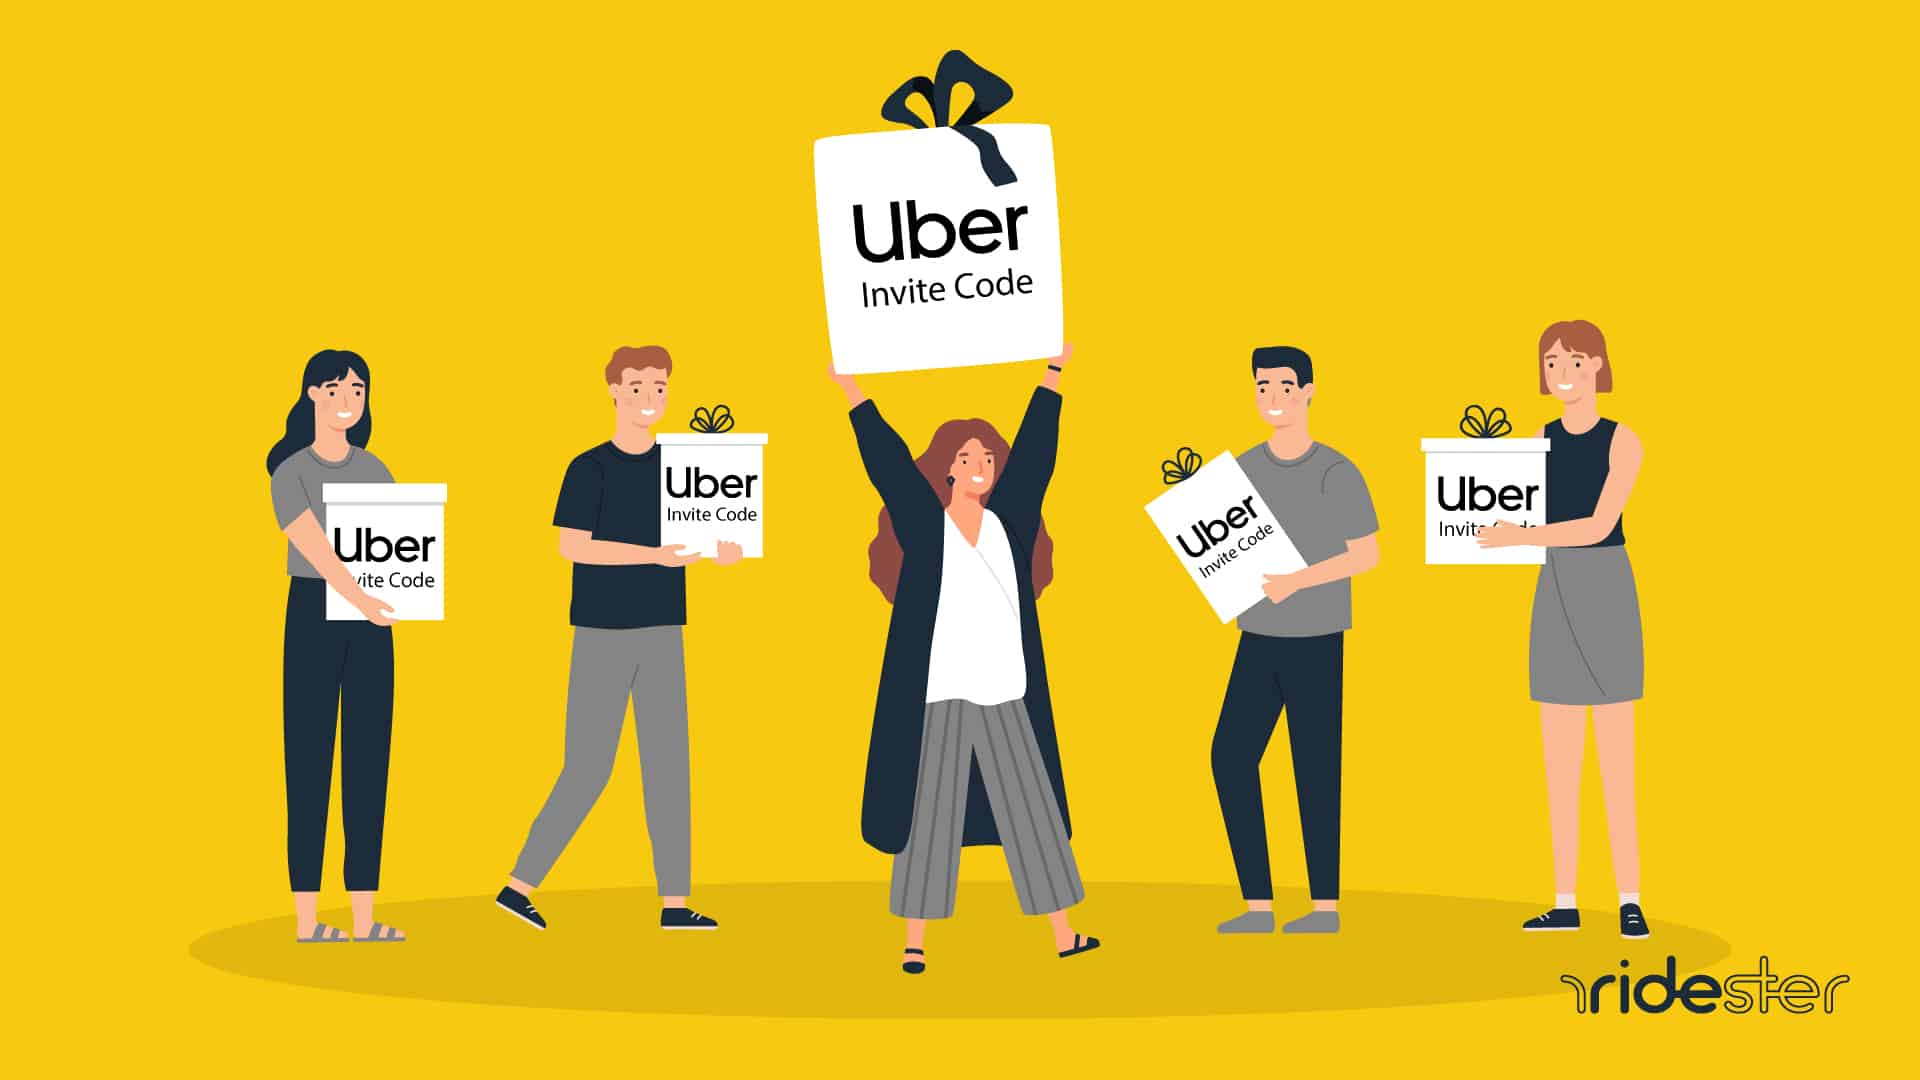 vector graphic showing people holding an Uber sign up bonus above their head